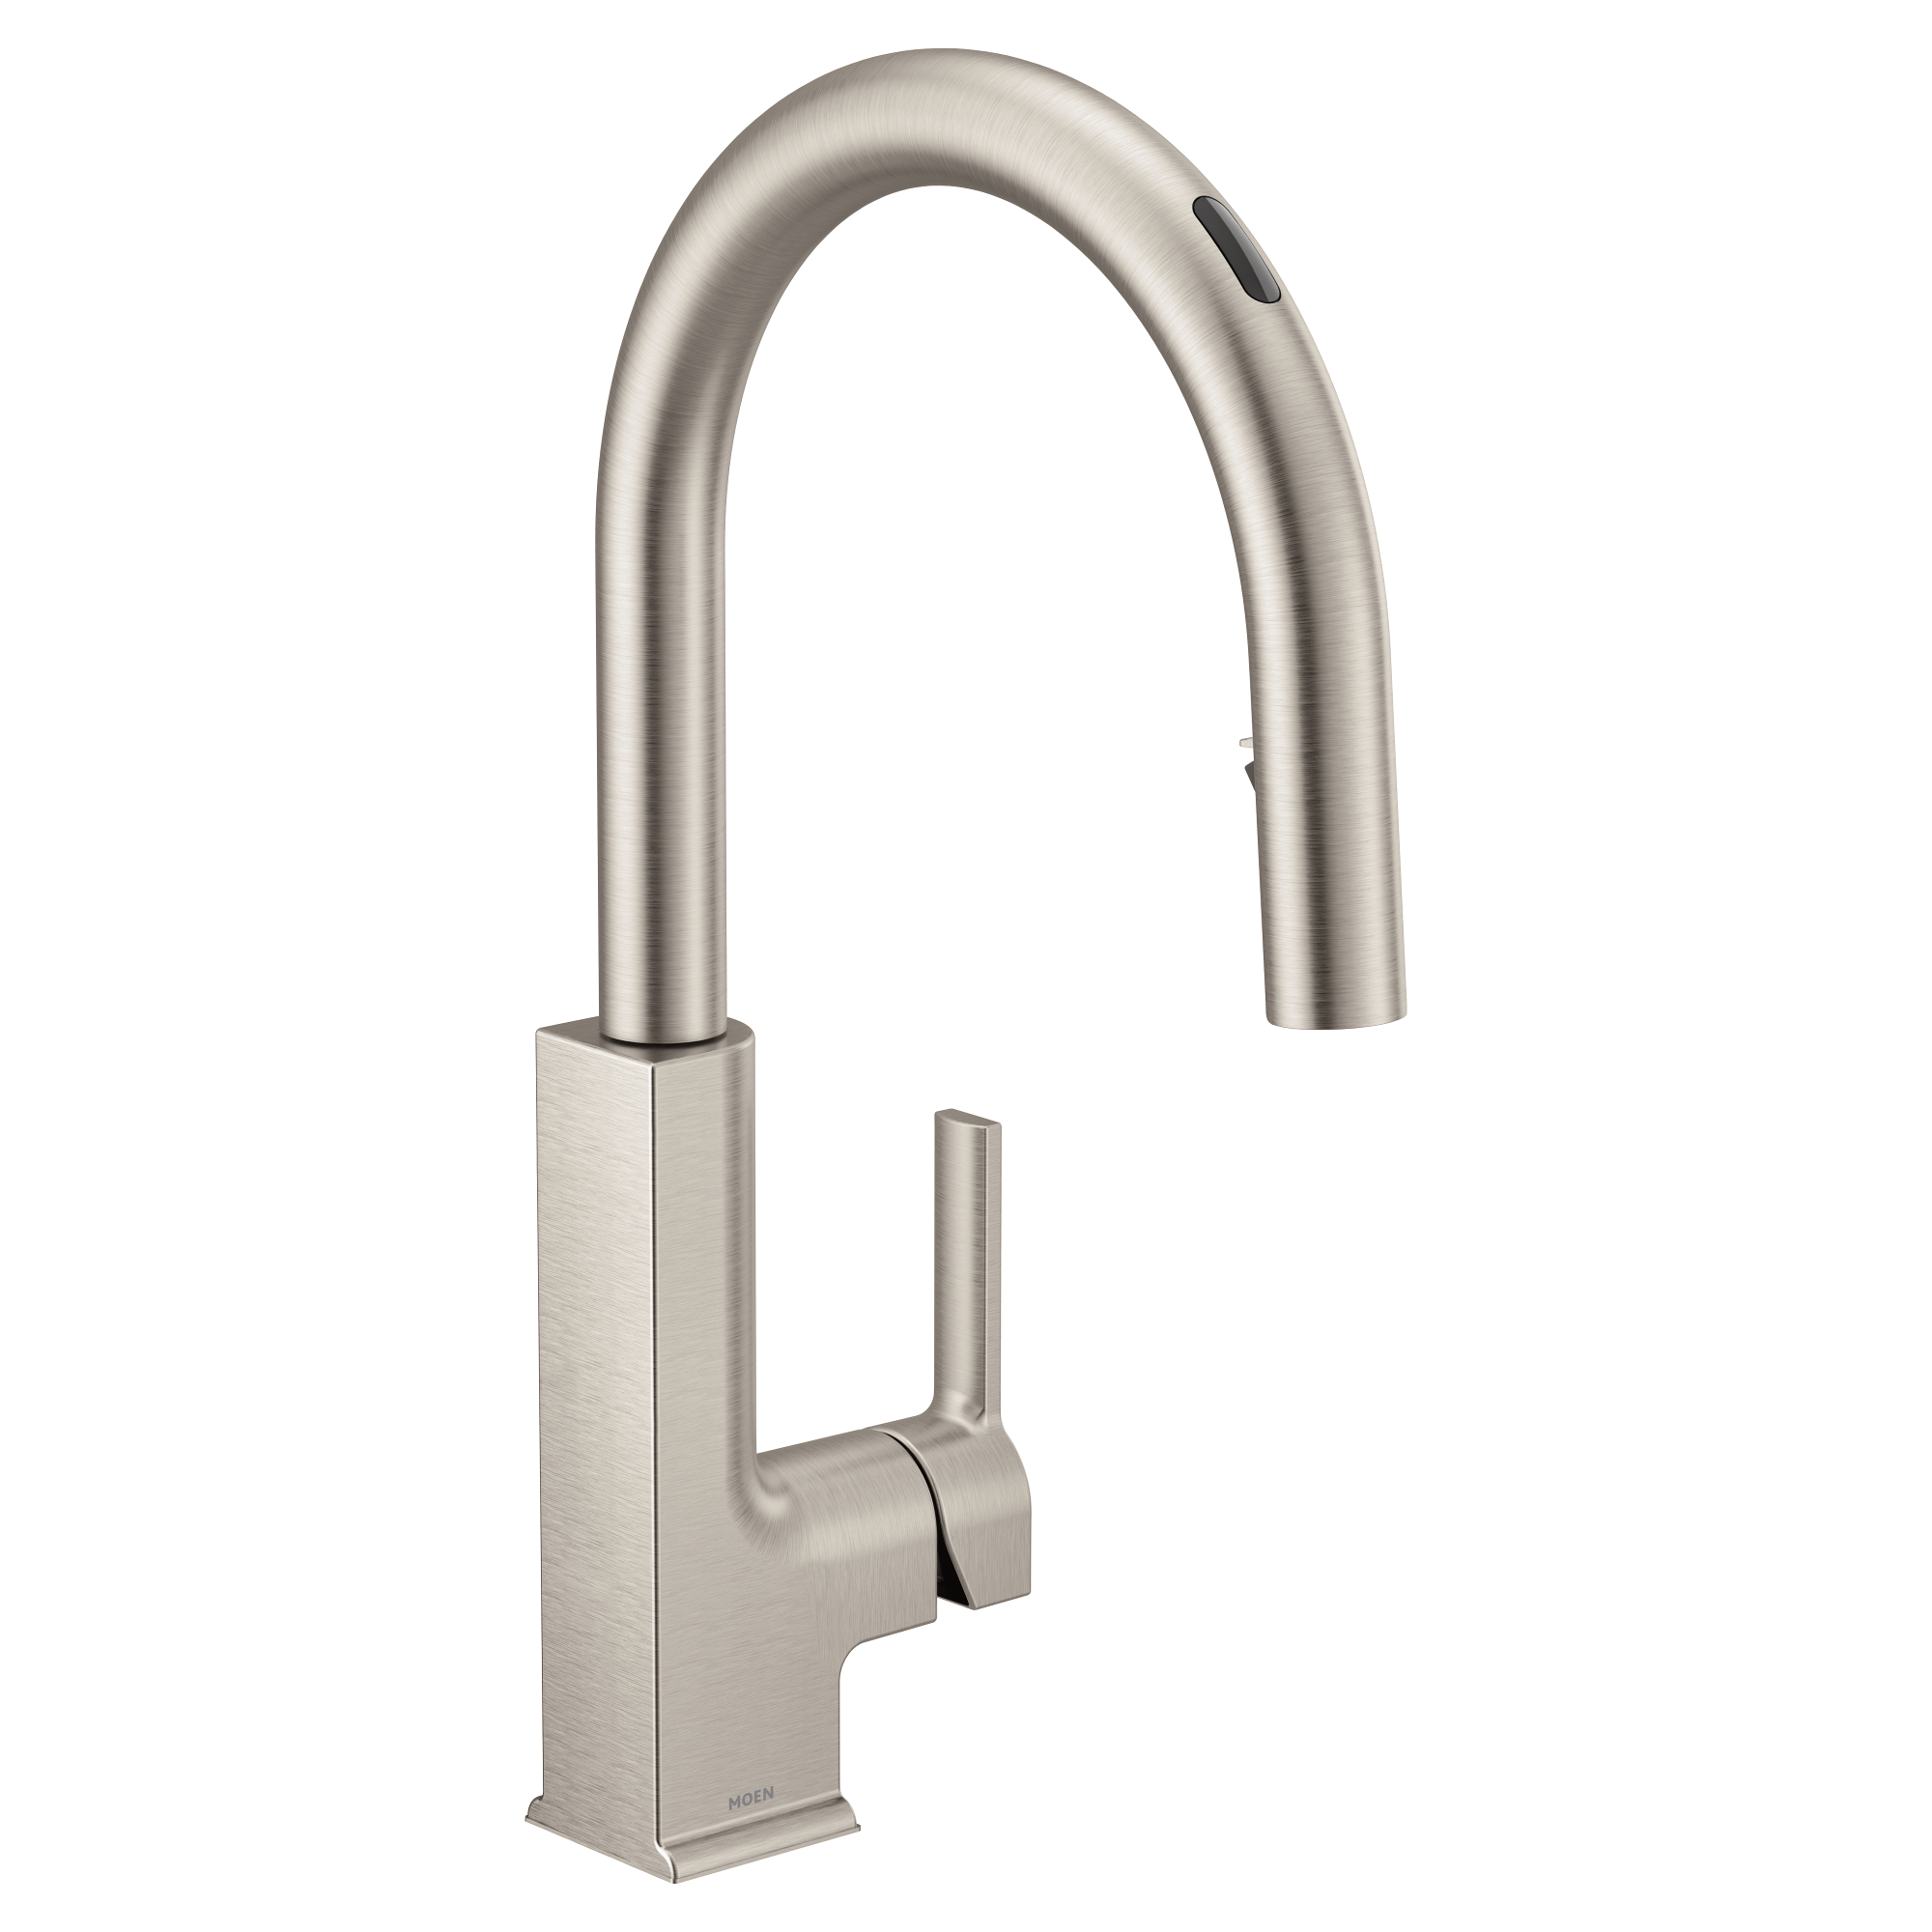 U by Moen STo Single-Handle Pull-Down Sprayer Smart Kitchen Faucet - Stainless